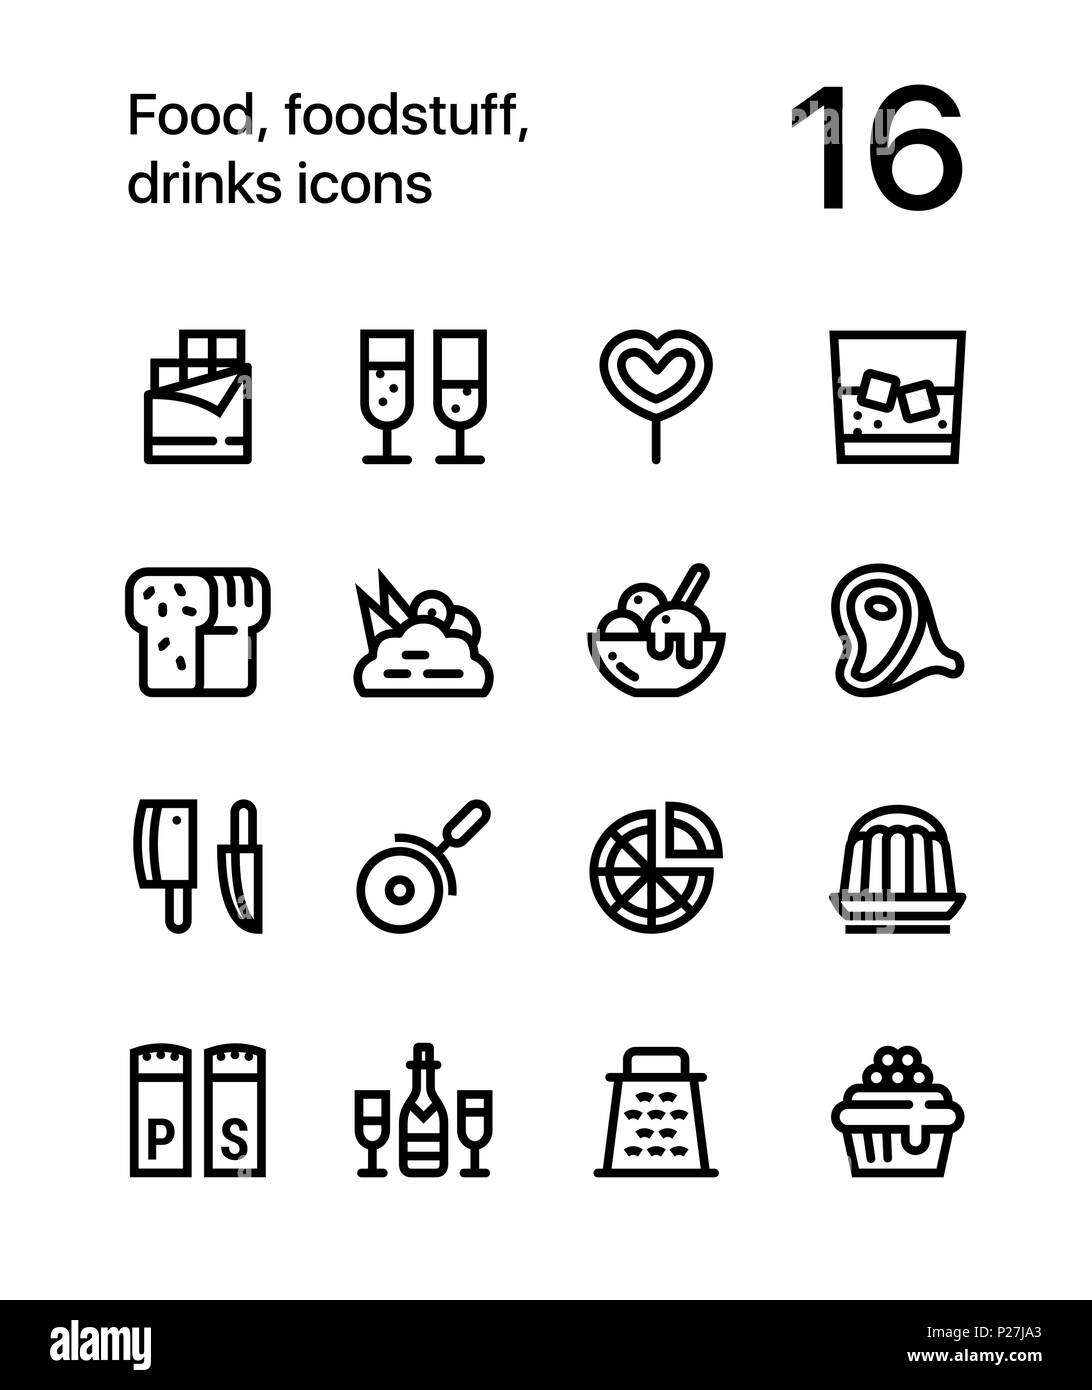 Food, foodstuff, drinks icons for web and mobile design pack 3 Stock Vector